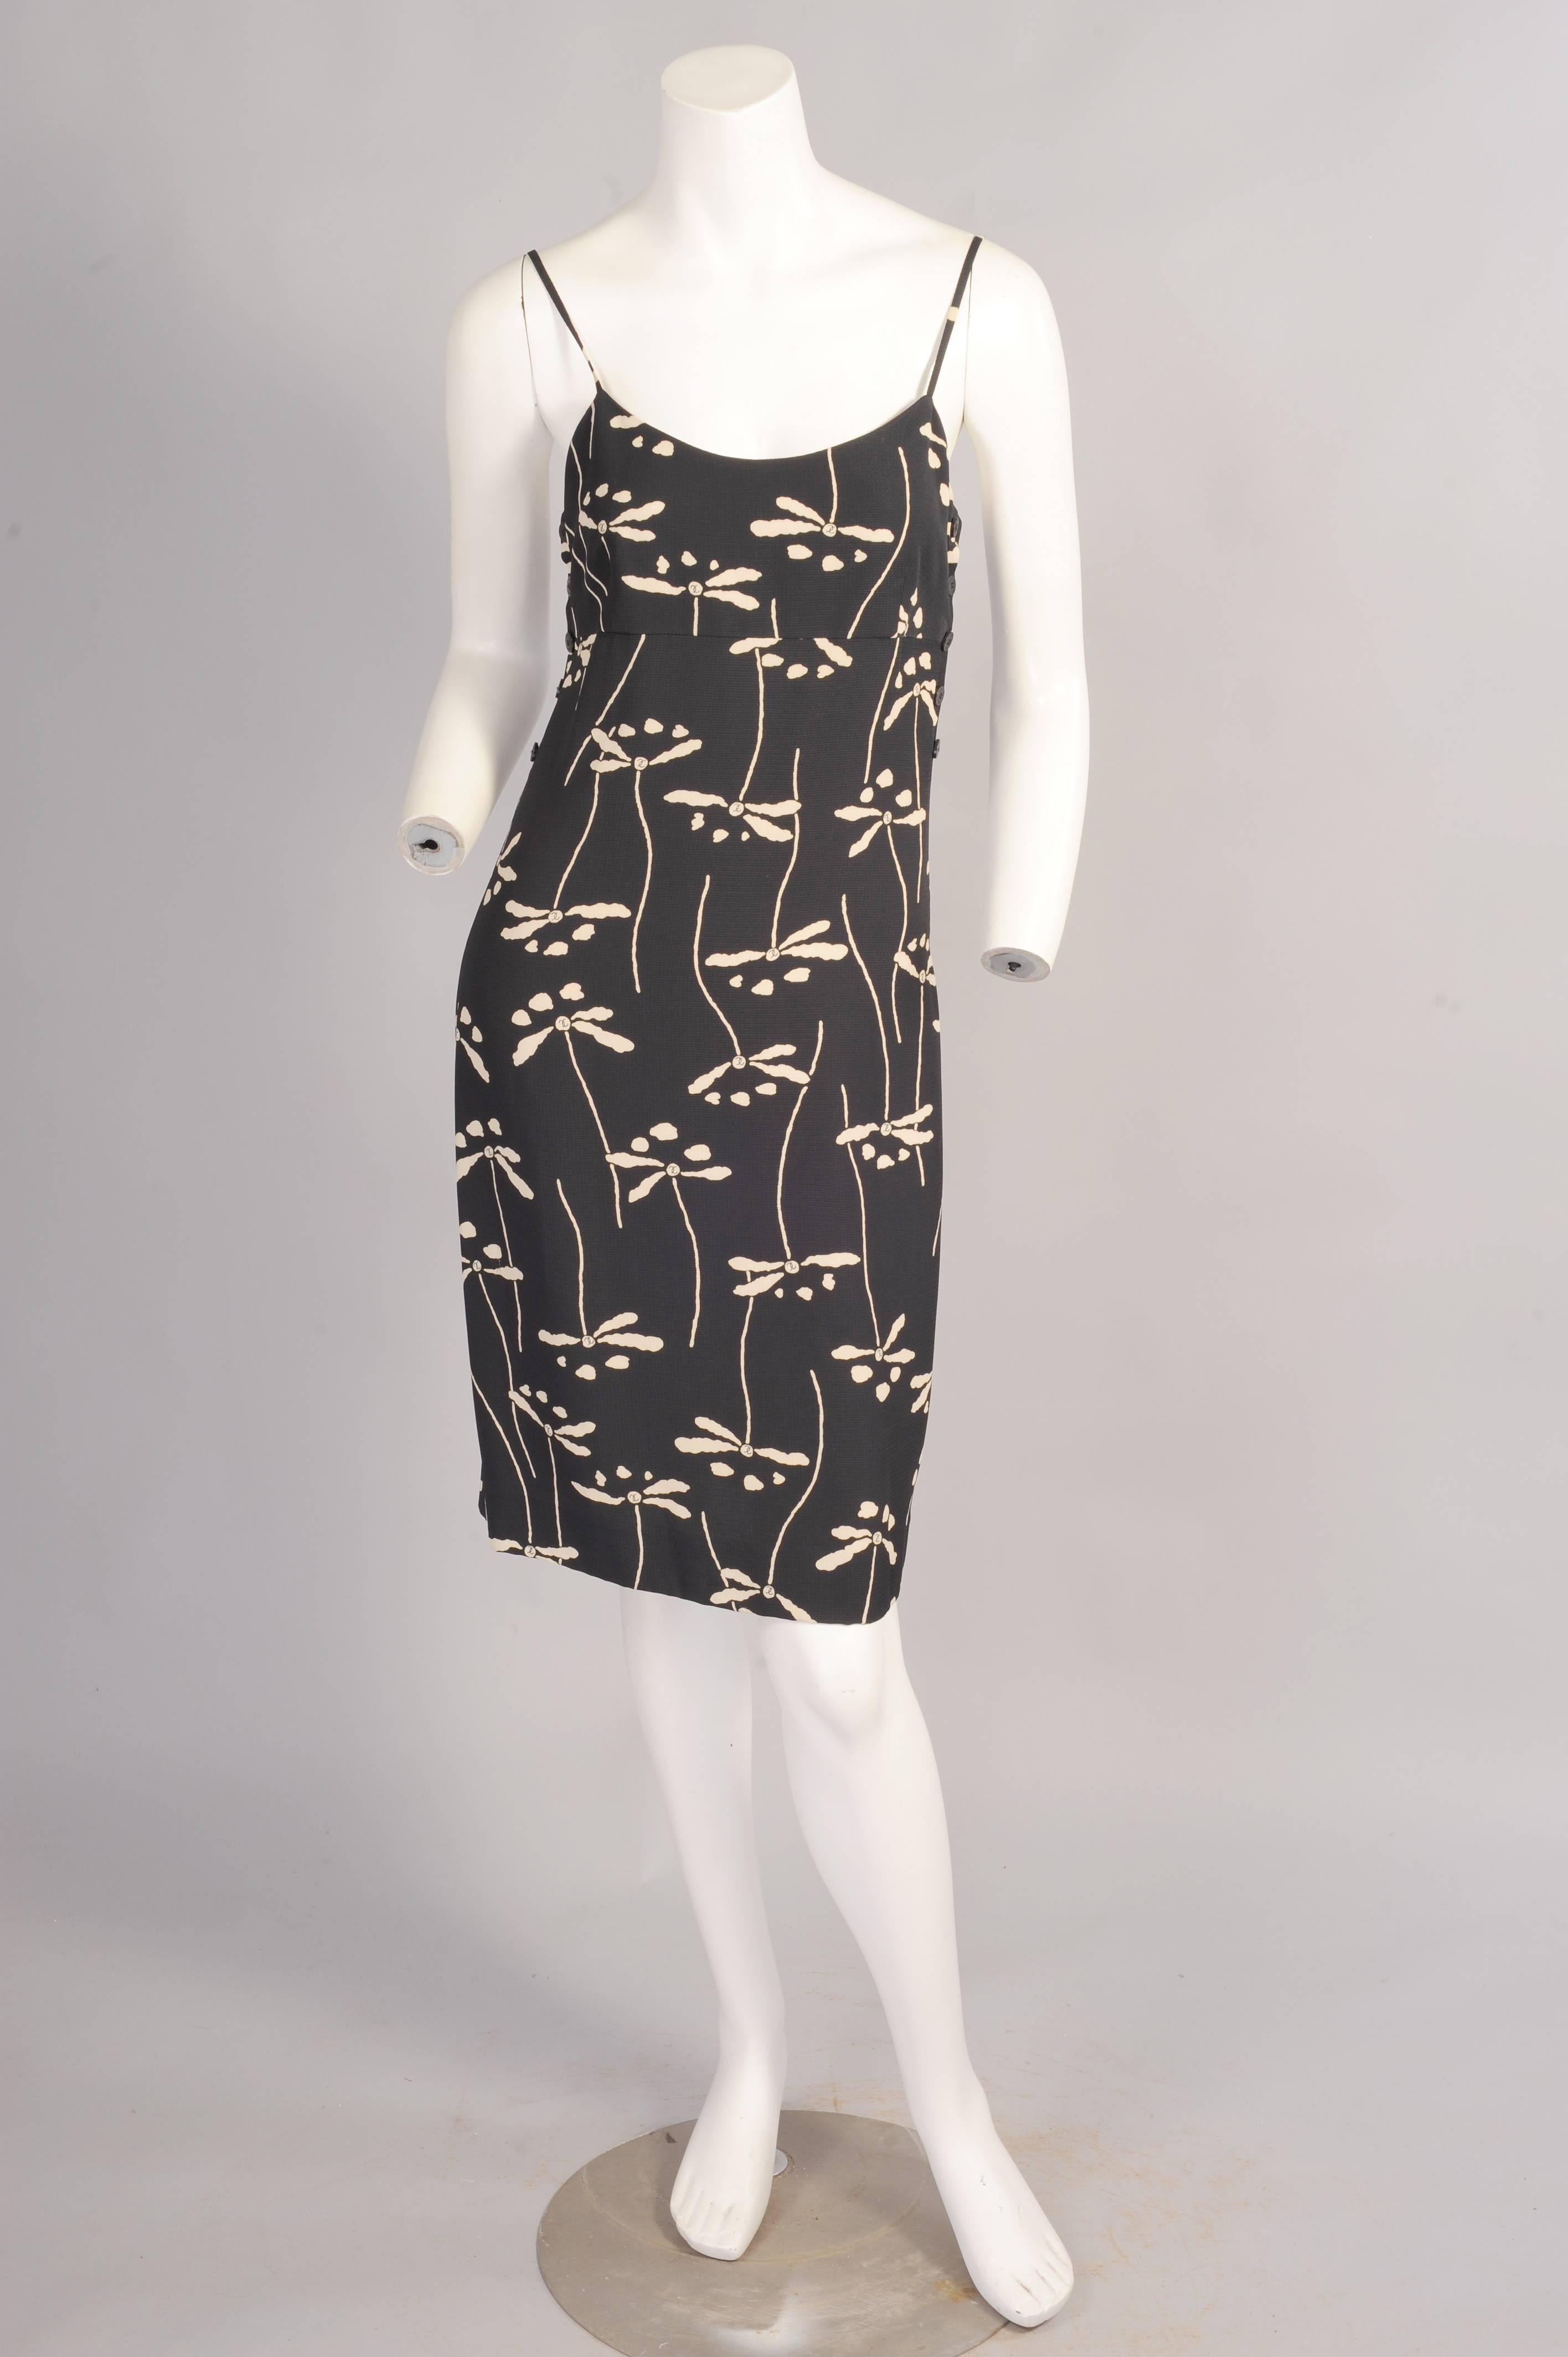 A charming black and cream dragonfly is enlivened with the chanel double C logo in the pattern. The dress has spaghetti srtaps and it buttons on each side to the waist. There is an invisible center back zipper. The dress is in excellent condition.